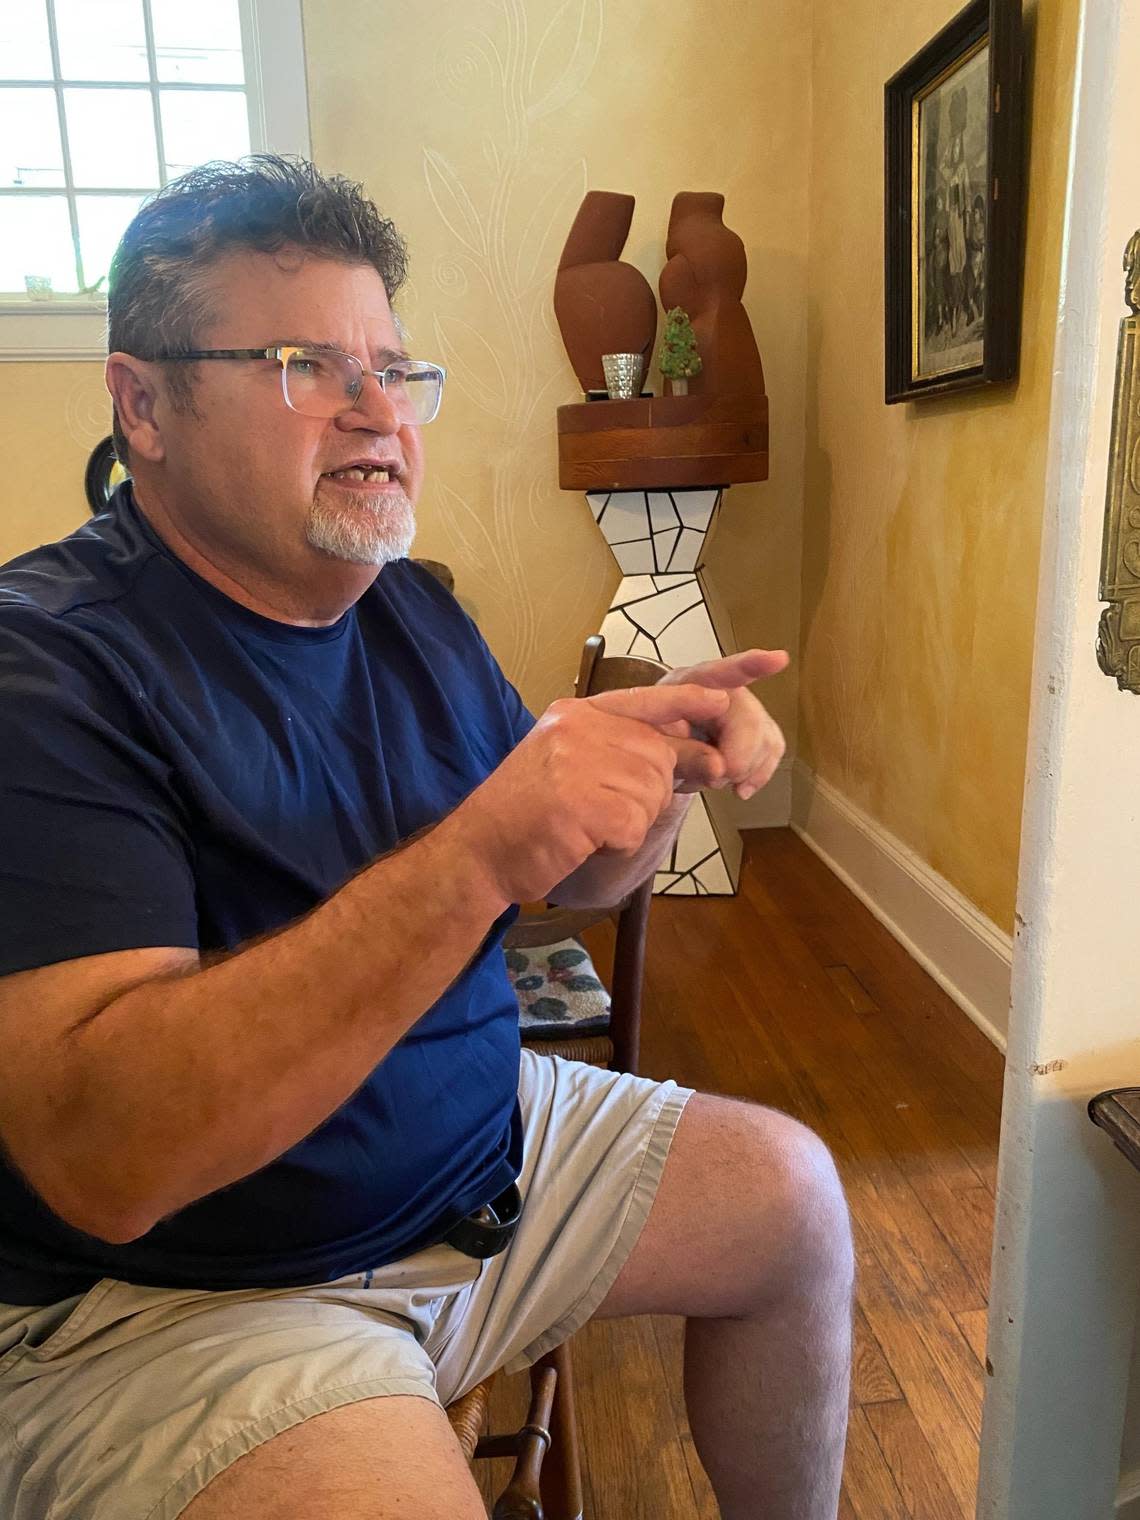 Will Hinton shows off a sculpture he made based on dancing with his wife, displayed in their home in Louisburg, where he is now retired as an art professor at Louisburg College.